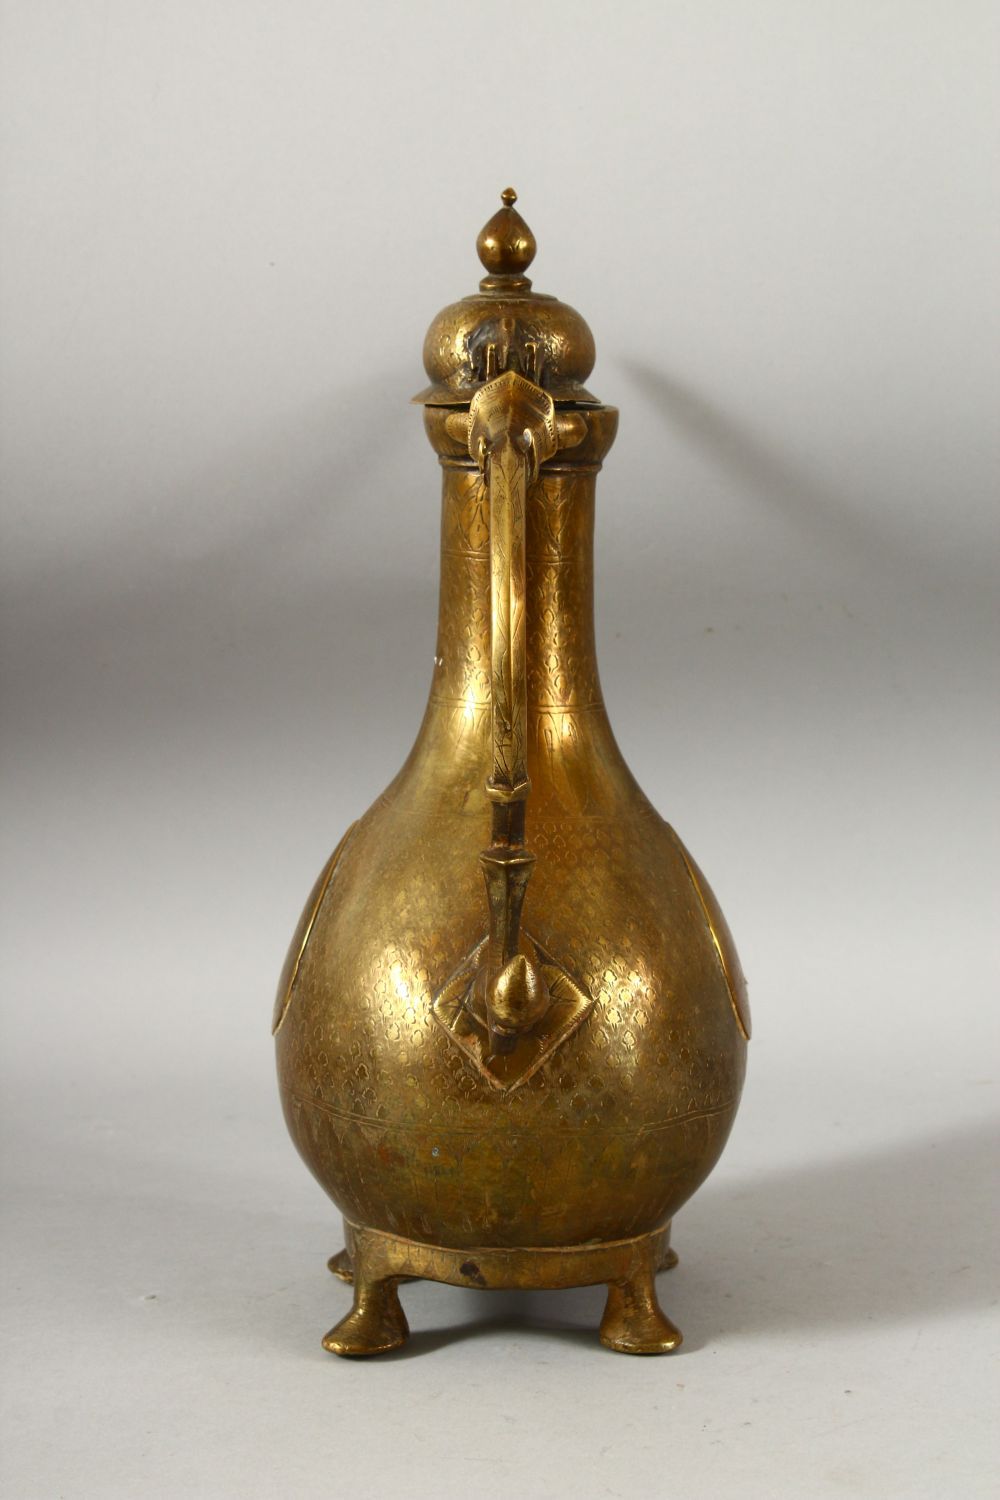 A LARGE 18TH CENTURY MUGHAL INDIAN BRASS EWER, with engraved / chased decoration, 32cm high. - Image 4 of 7